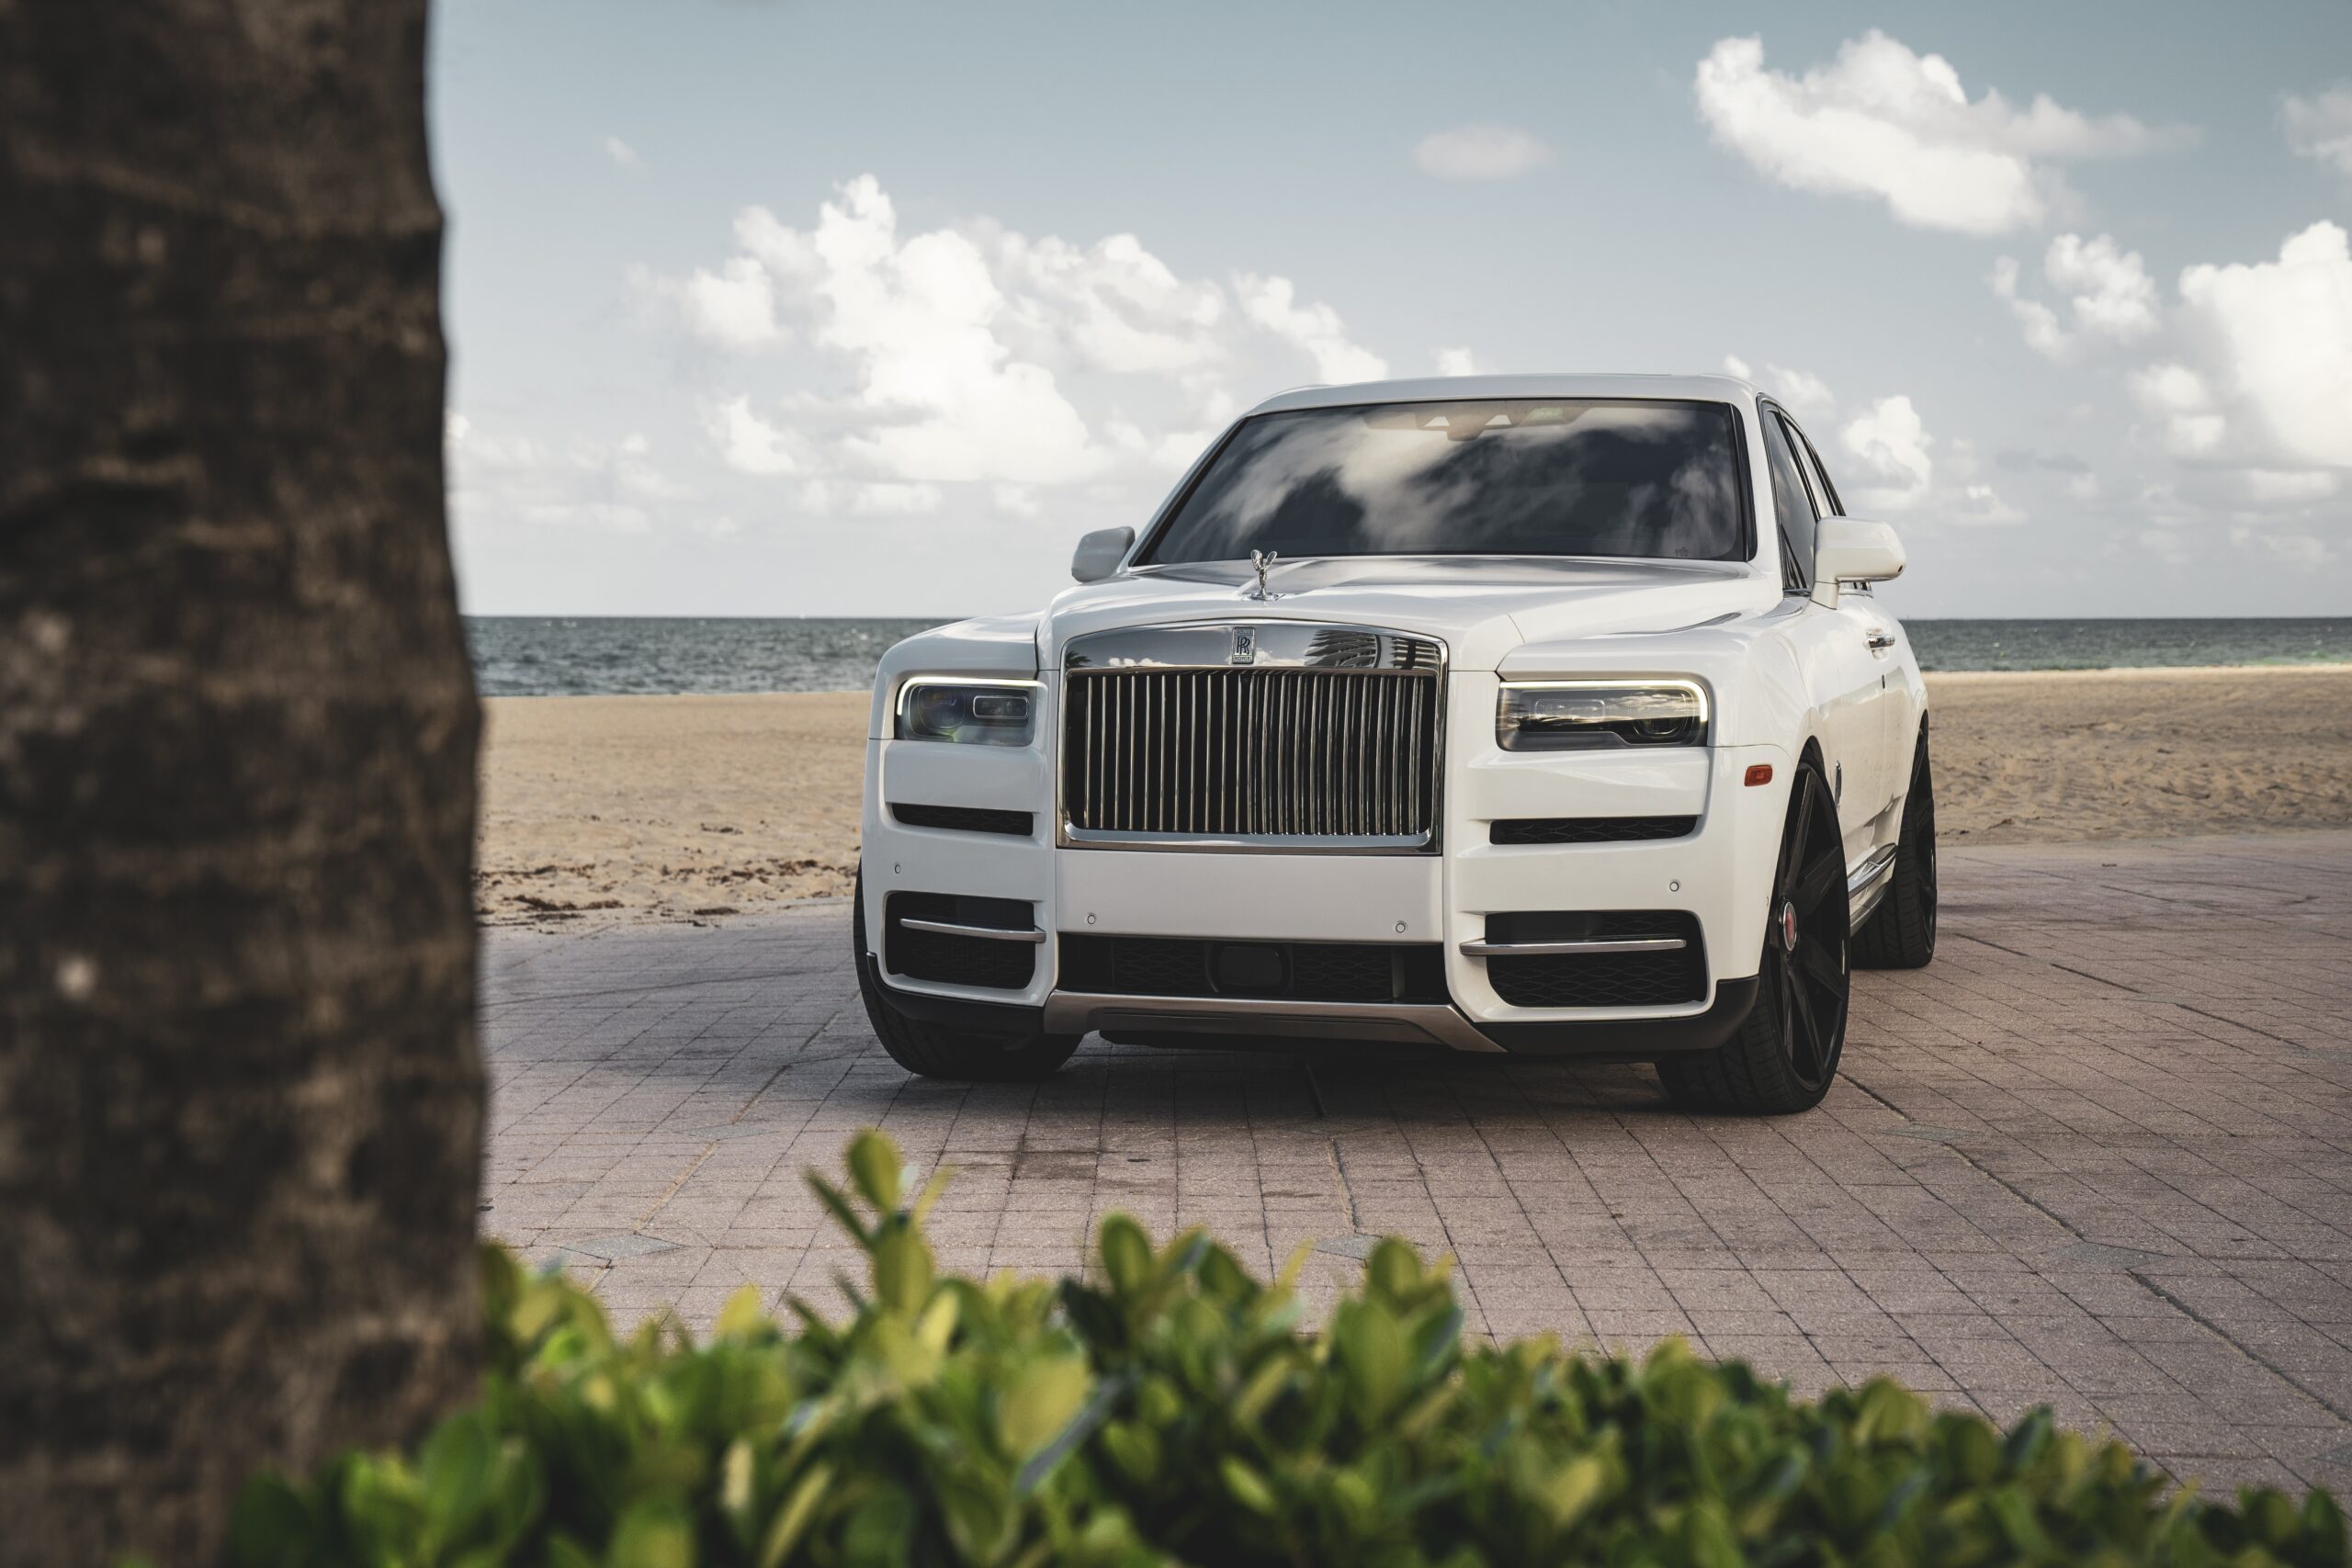 NFL Star Micah Parsons All car collection Rolls-Royce Cullinan